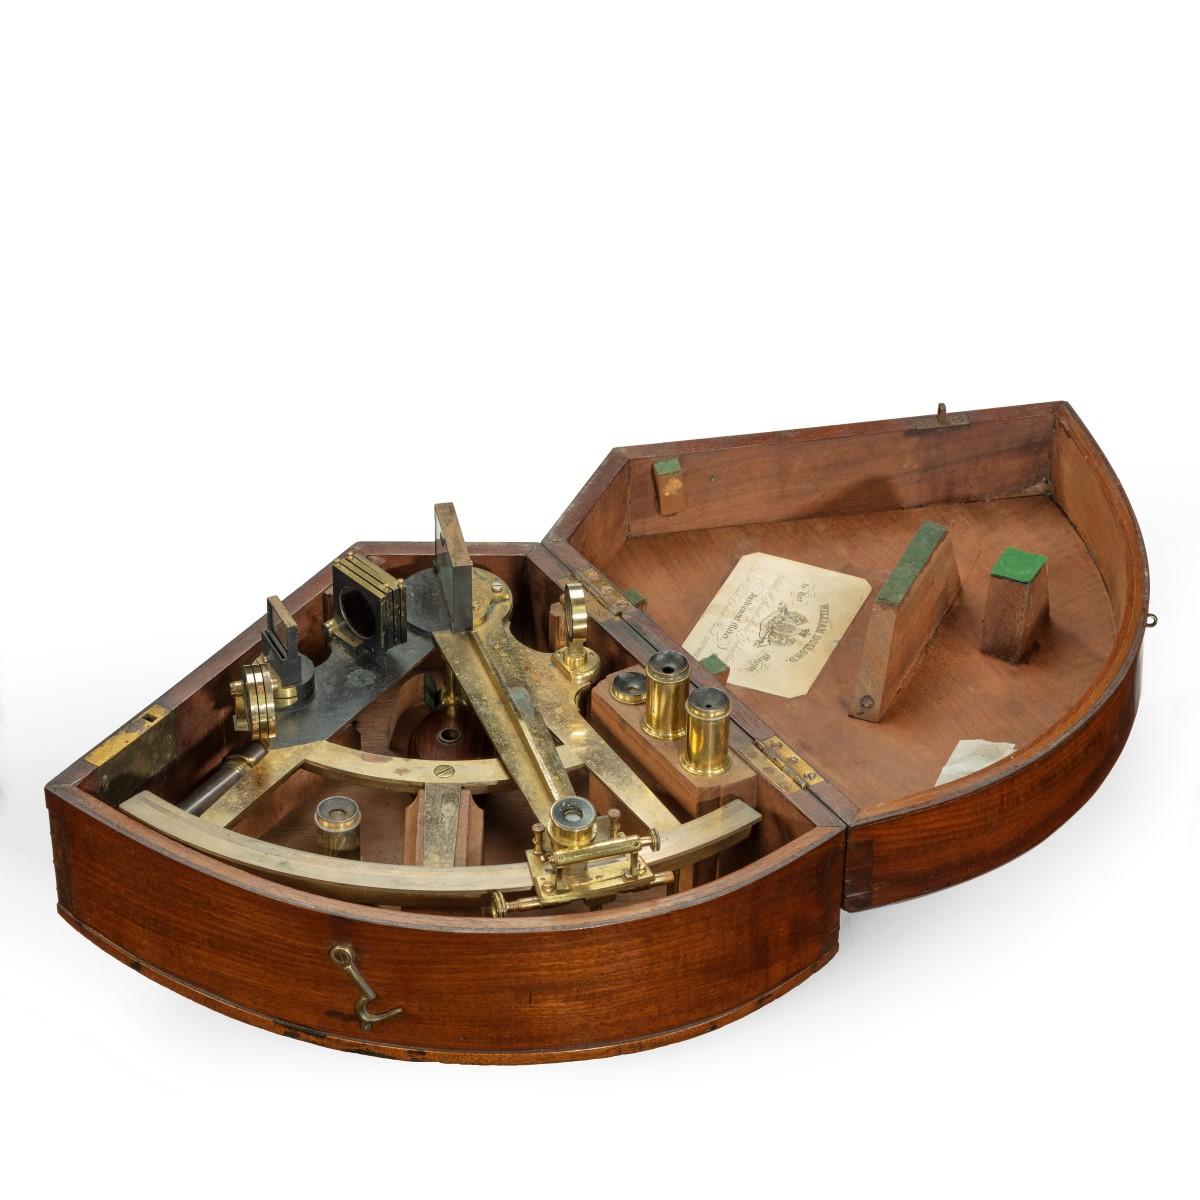 A brass Sextant by William Dolland, of typical form with a mahogany handle and selection of eye-pieces and lenses, in a fitted wooden case with a paper maker’s label stating ‘William Dolland, to Her Majesty, Optical, Mathematical, Philosophical